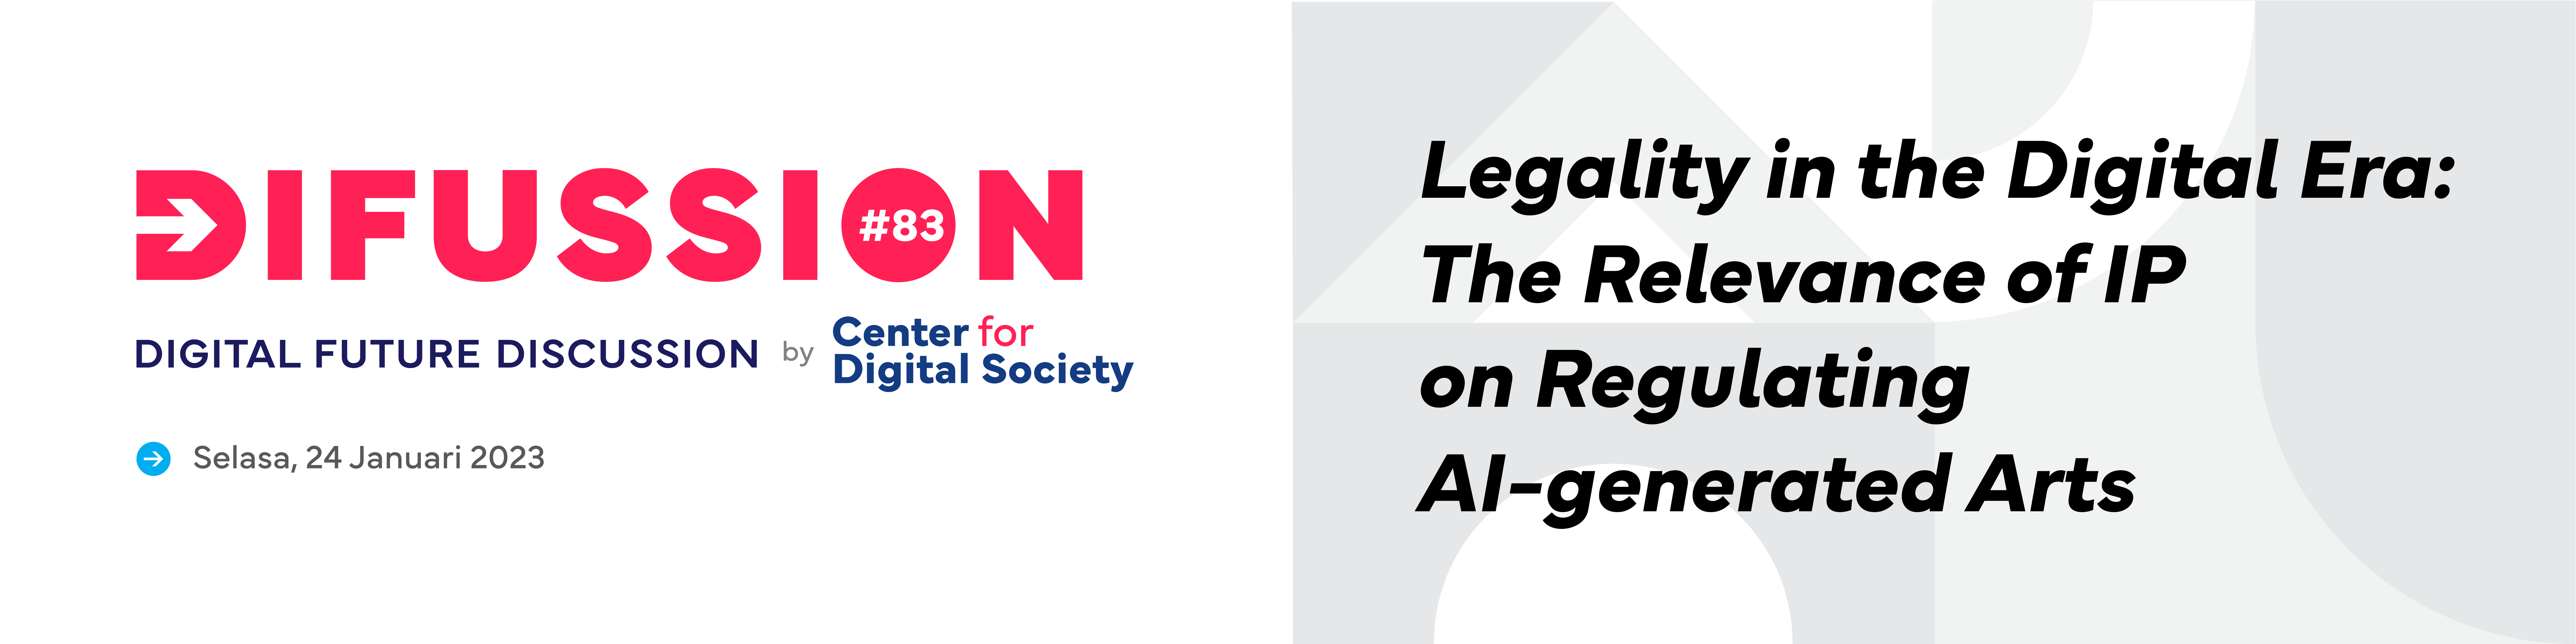 [PRESS RELEASE] Legality in the Digital Era: The Relevance of IP on Regulating AI-generated Arts | Difusion #83